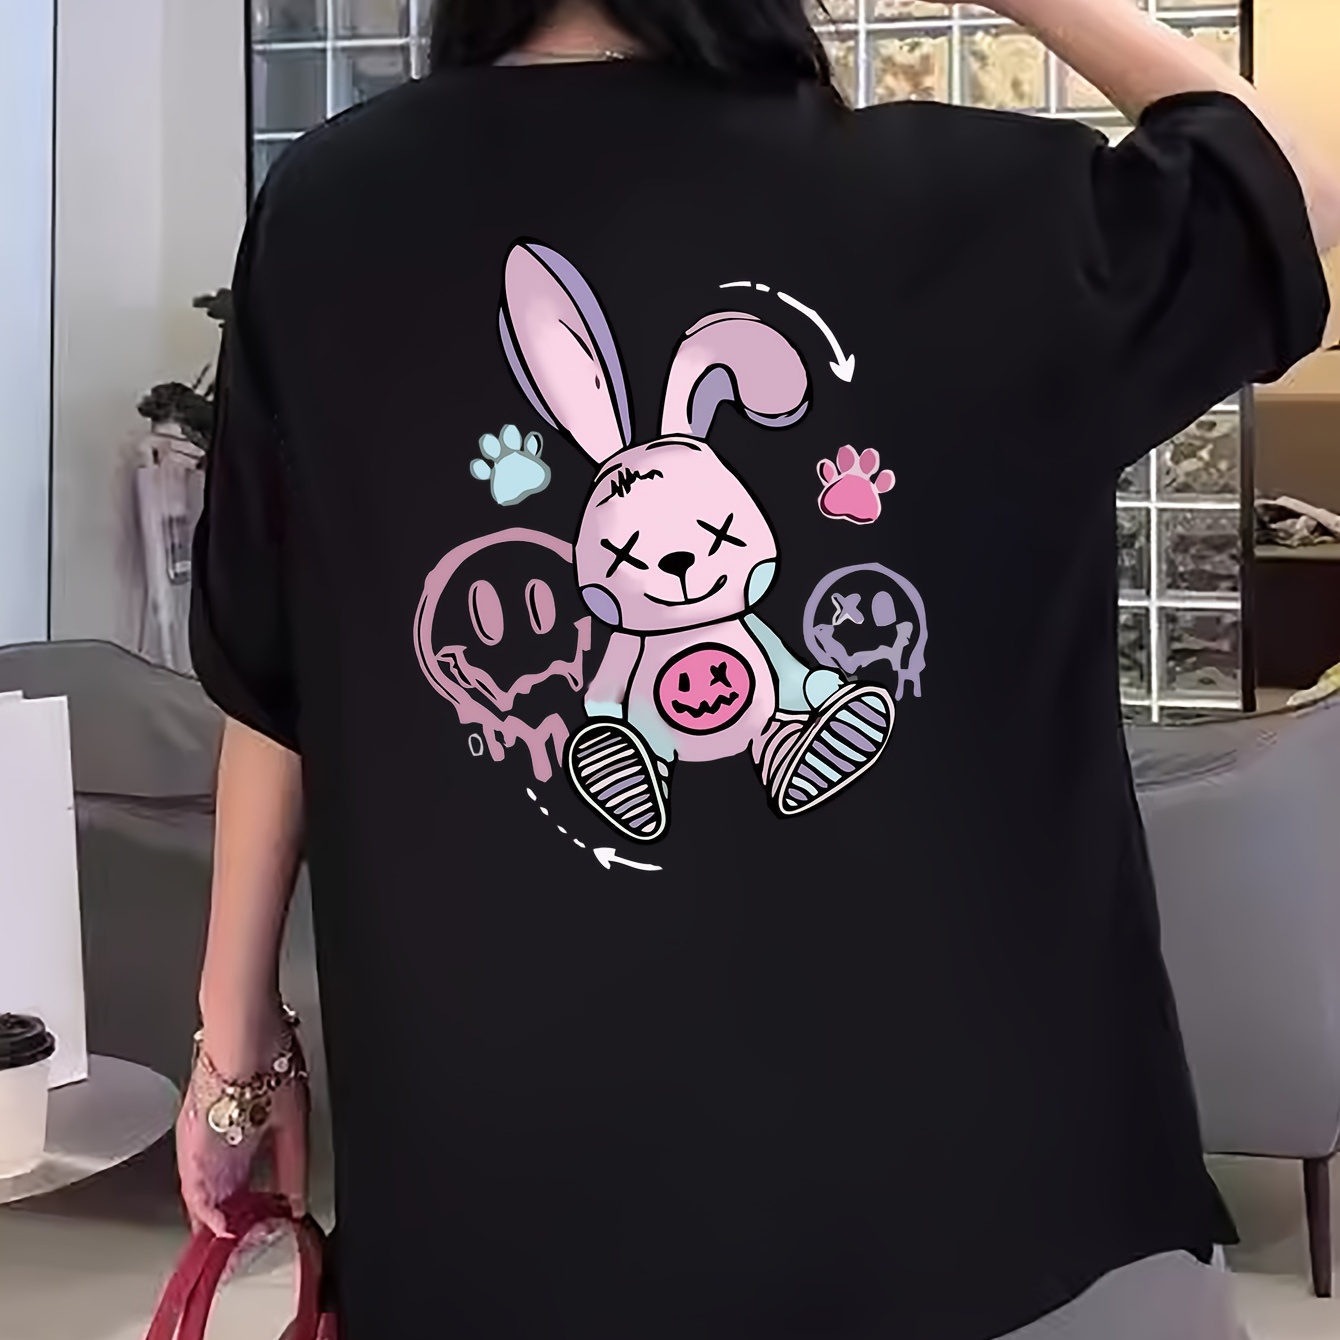 

Rabbit Print Crew Neck T-shirt, Casual Short Sleeve Top For Spring & Summer, Women's Clothing